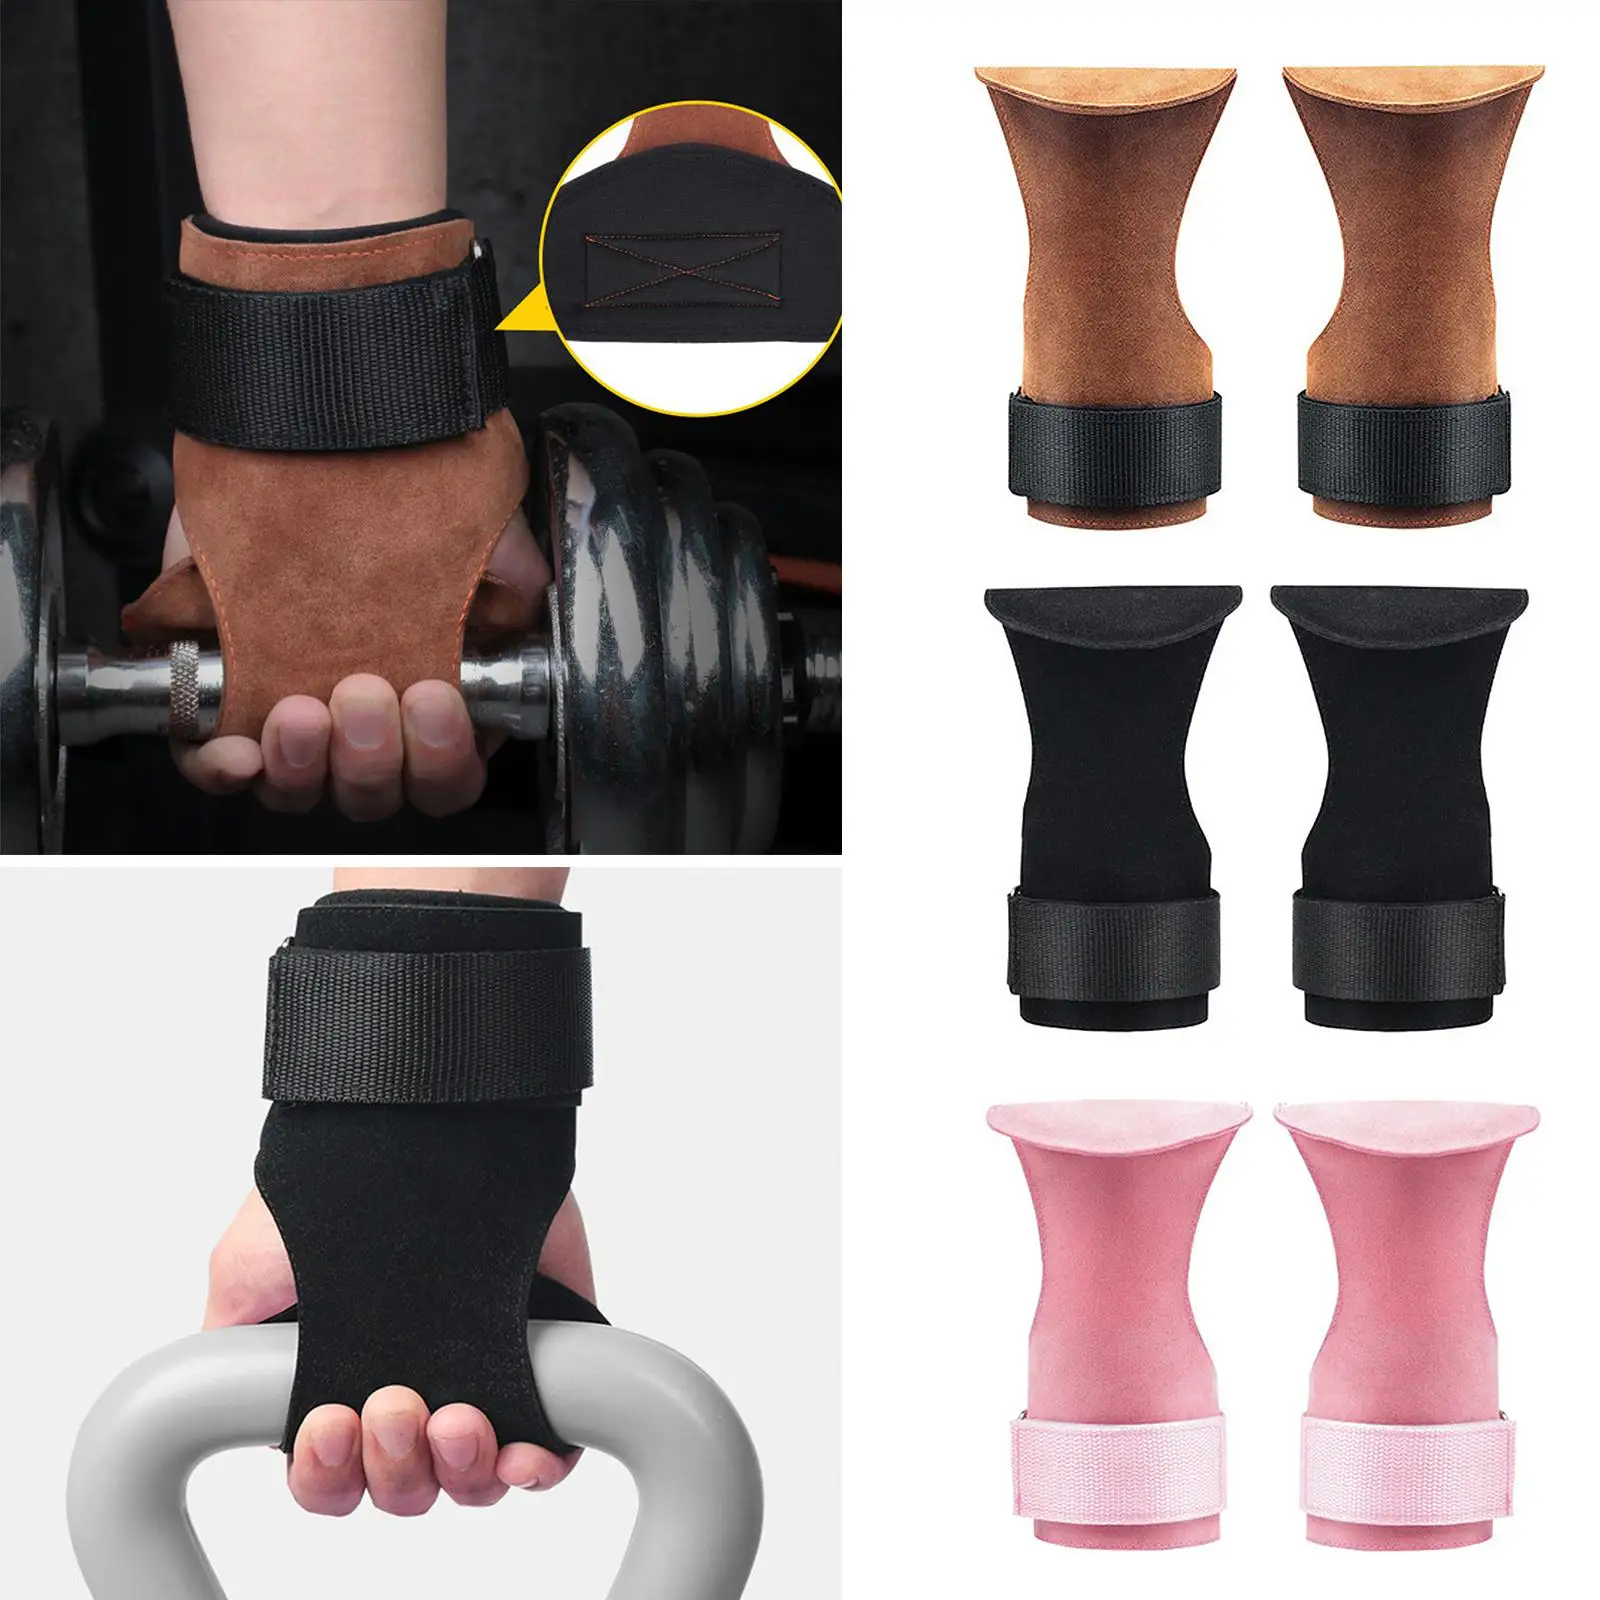 2 Pieces Weight Lifting Grips with Wrist Straps Non Slip Wrist Support Weightlifting Gloves for Deadlift Fitness Gym